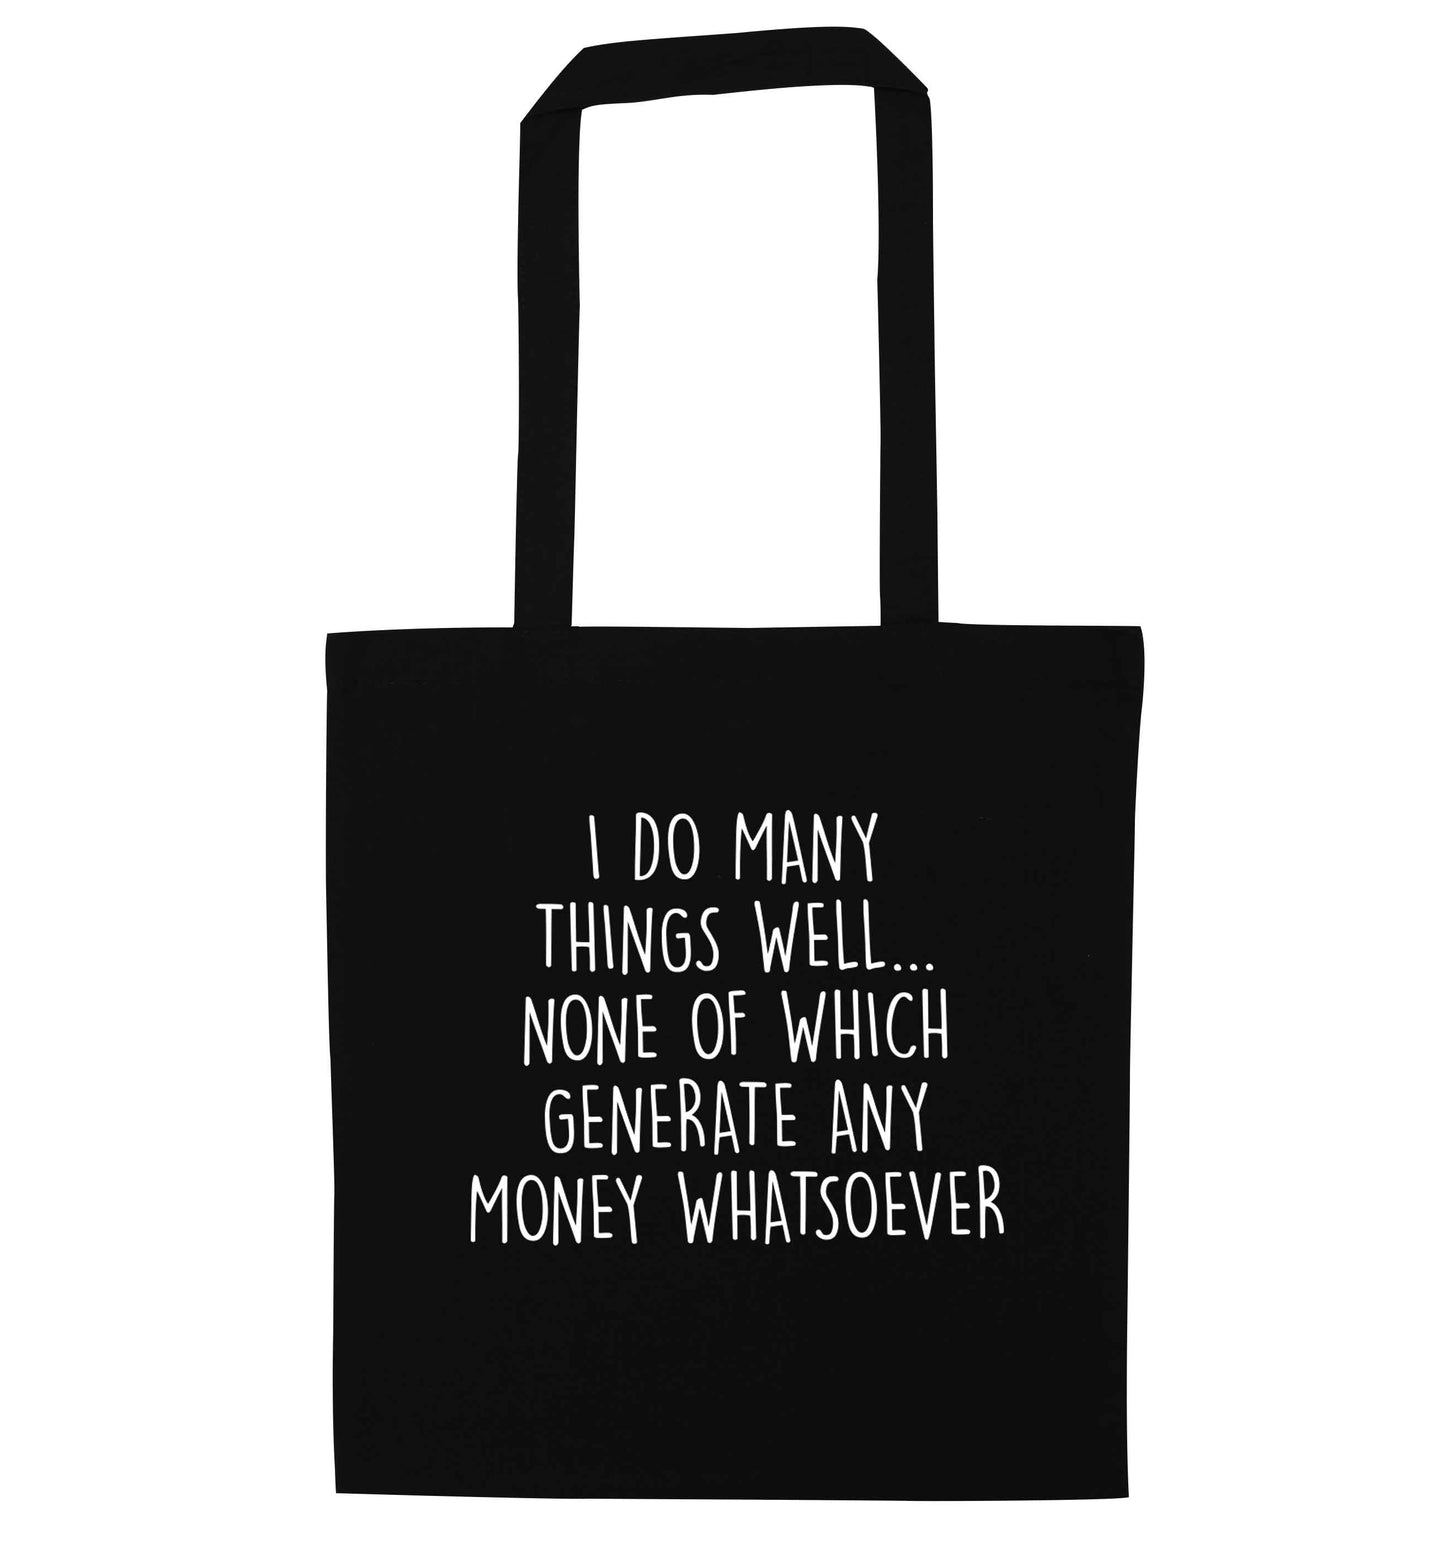 I do many things well none of which generate income black tote bag